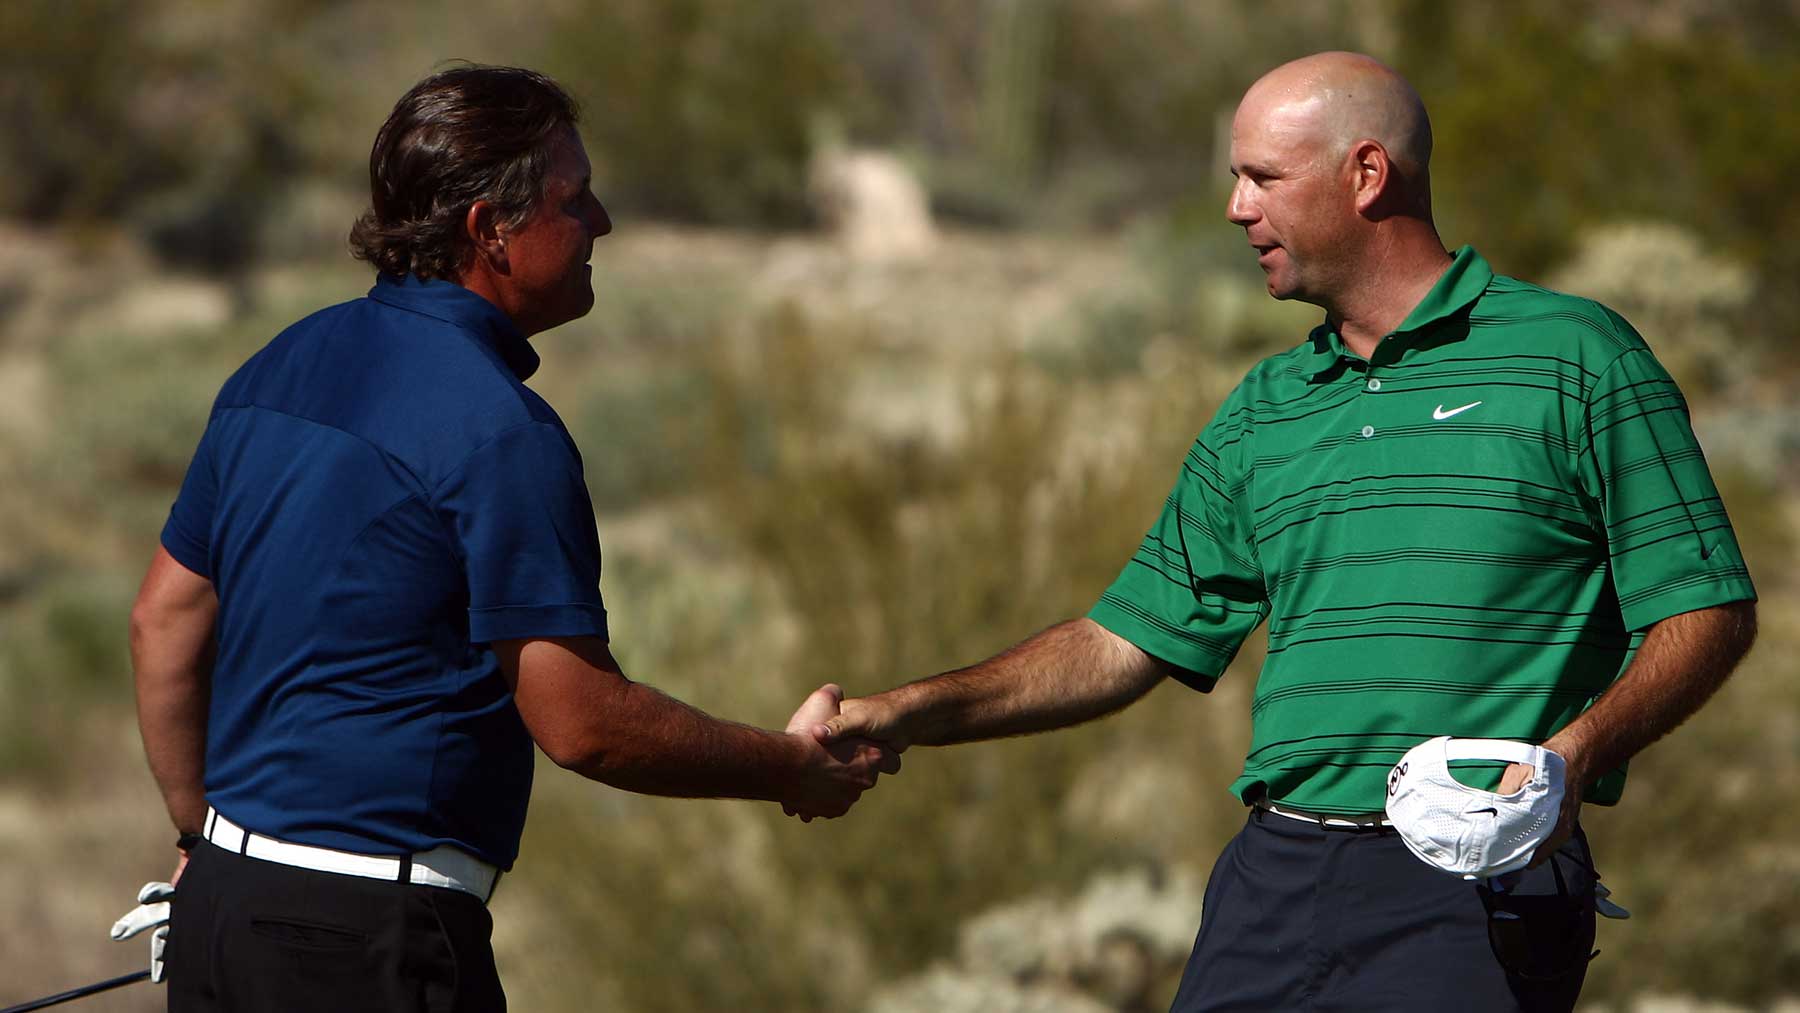 Stewart Cink shakes the hand of Phil Mickelson after Cink's 1-Up victory in the 18th hole during the third round of the Accenture Match Play Championships at the Ritz-Carlton Golf Club at Dove Mountain on February 27, 2009 in Marana, Arizona. Mickelson lost to Stewart Cink 1-Up. (